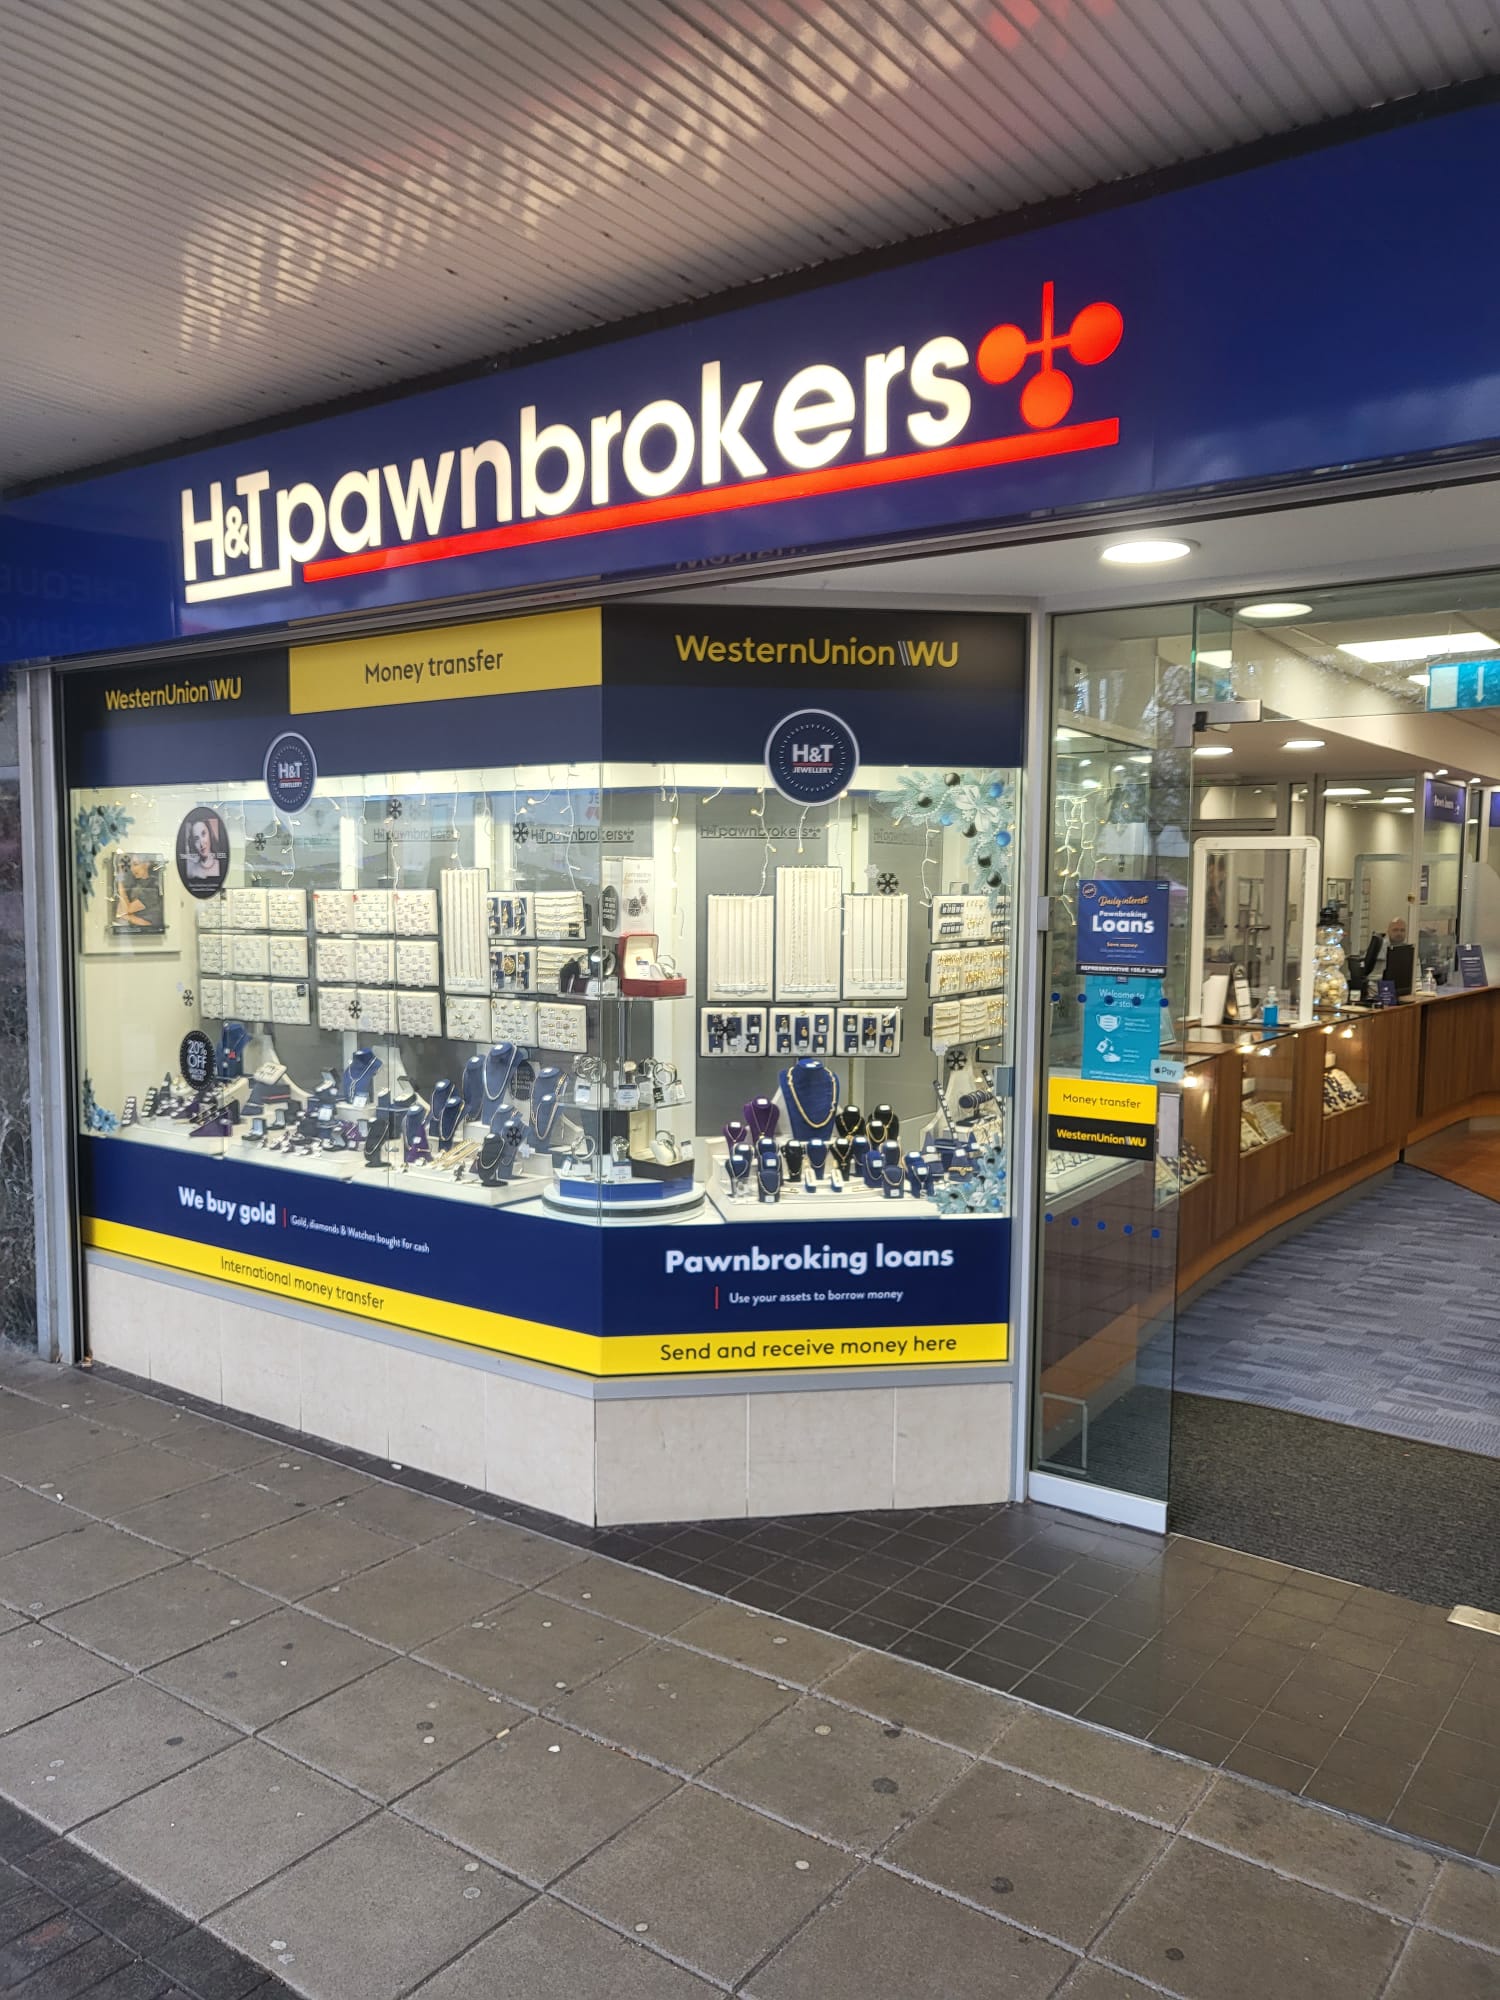 H&T Pawnbrokers 02